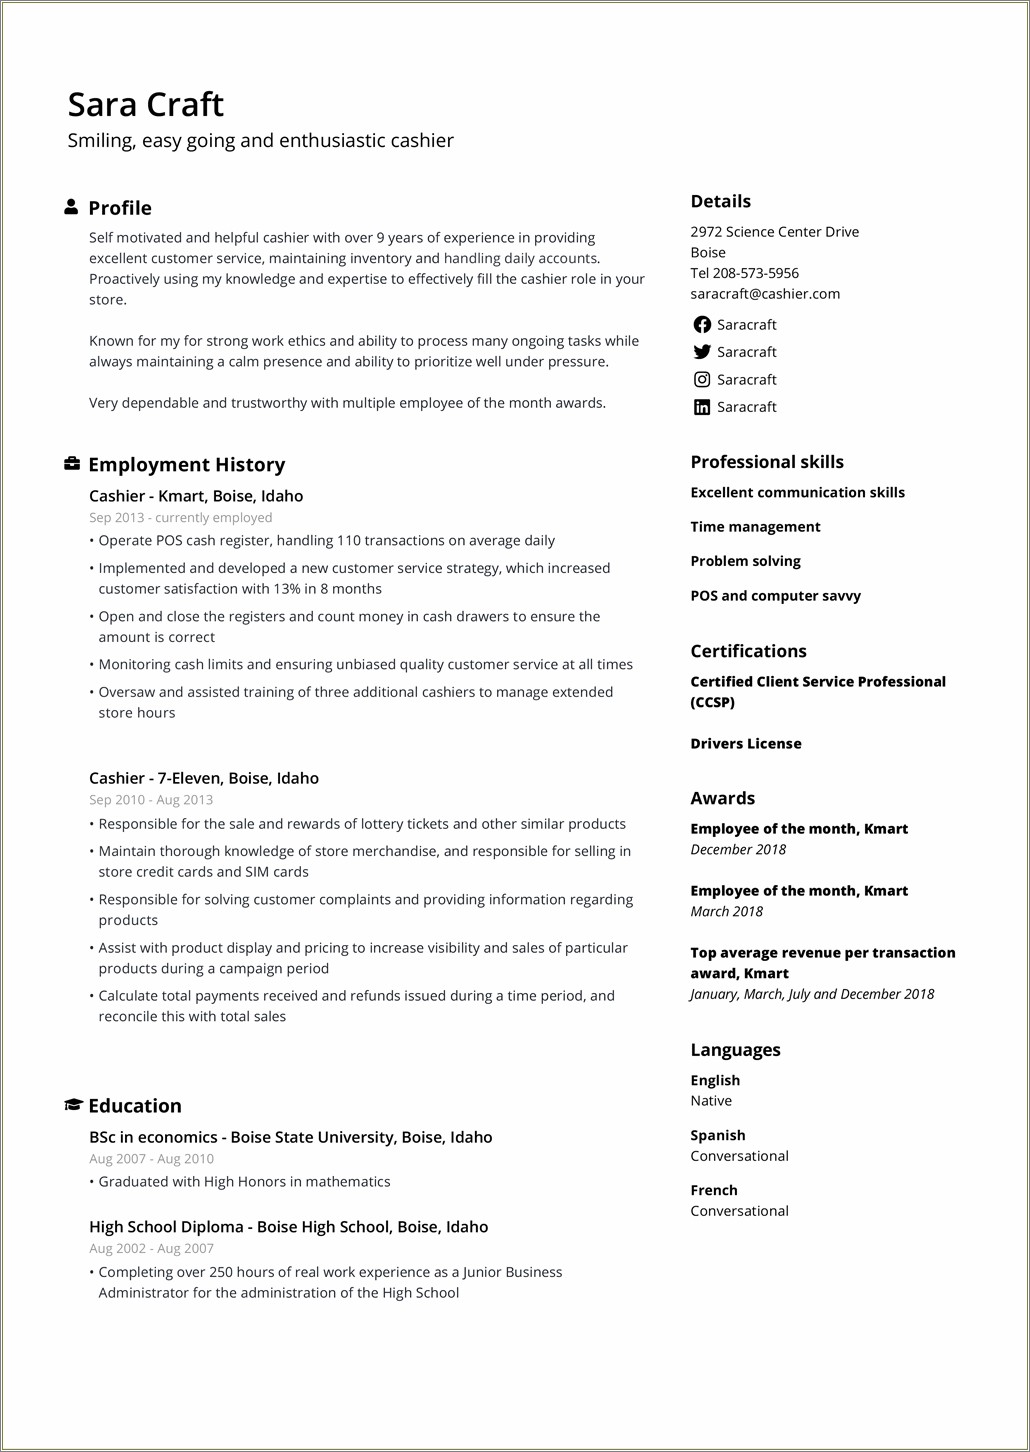 Able To Count Money Fast Cashier Resume Skill